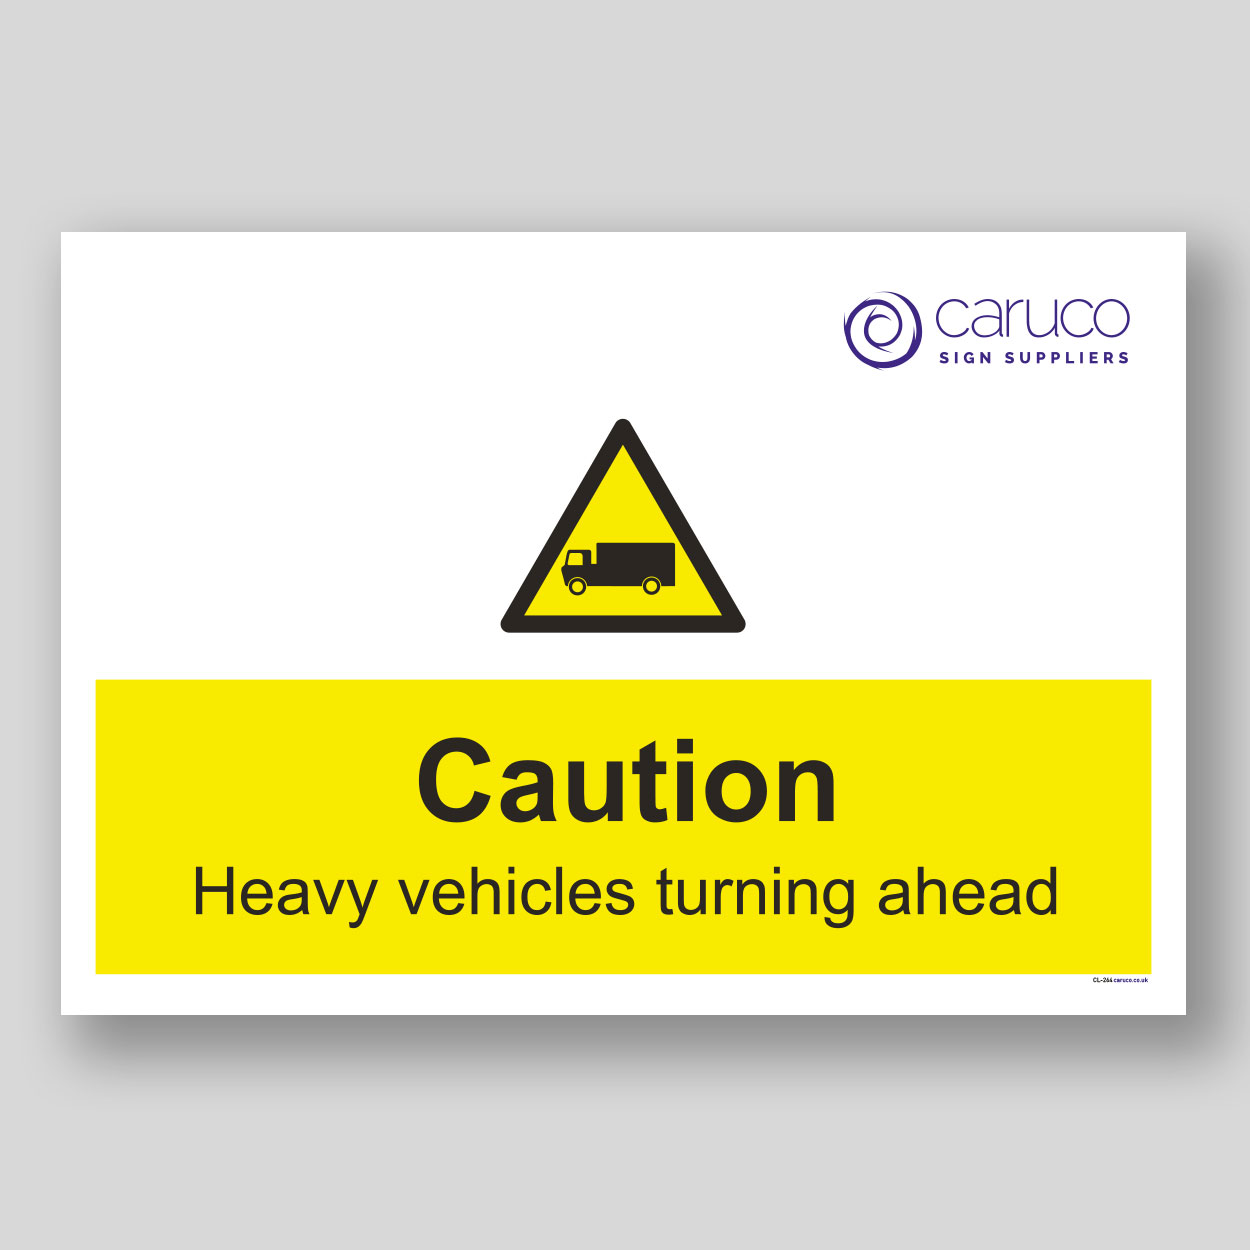 CL-264 Caution - heavy vehicles turning